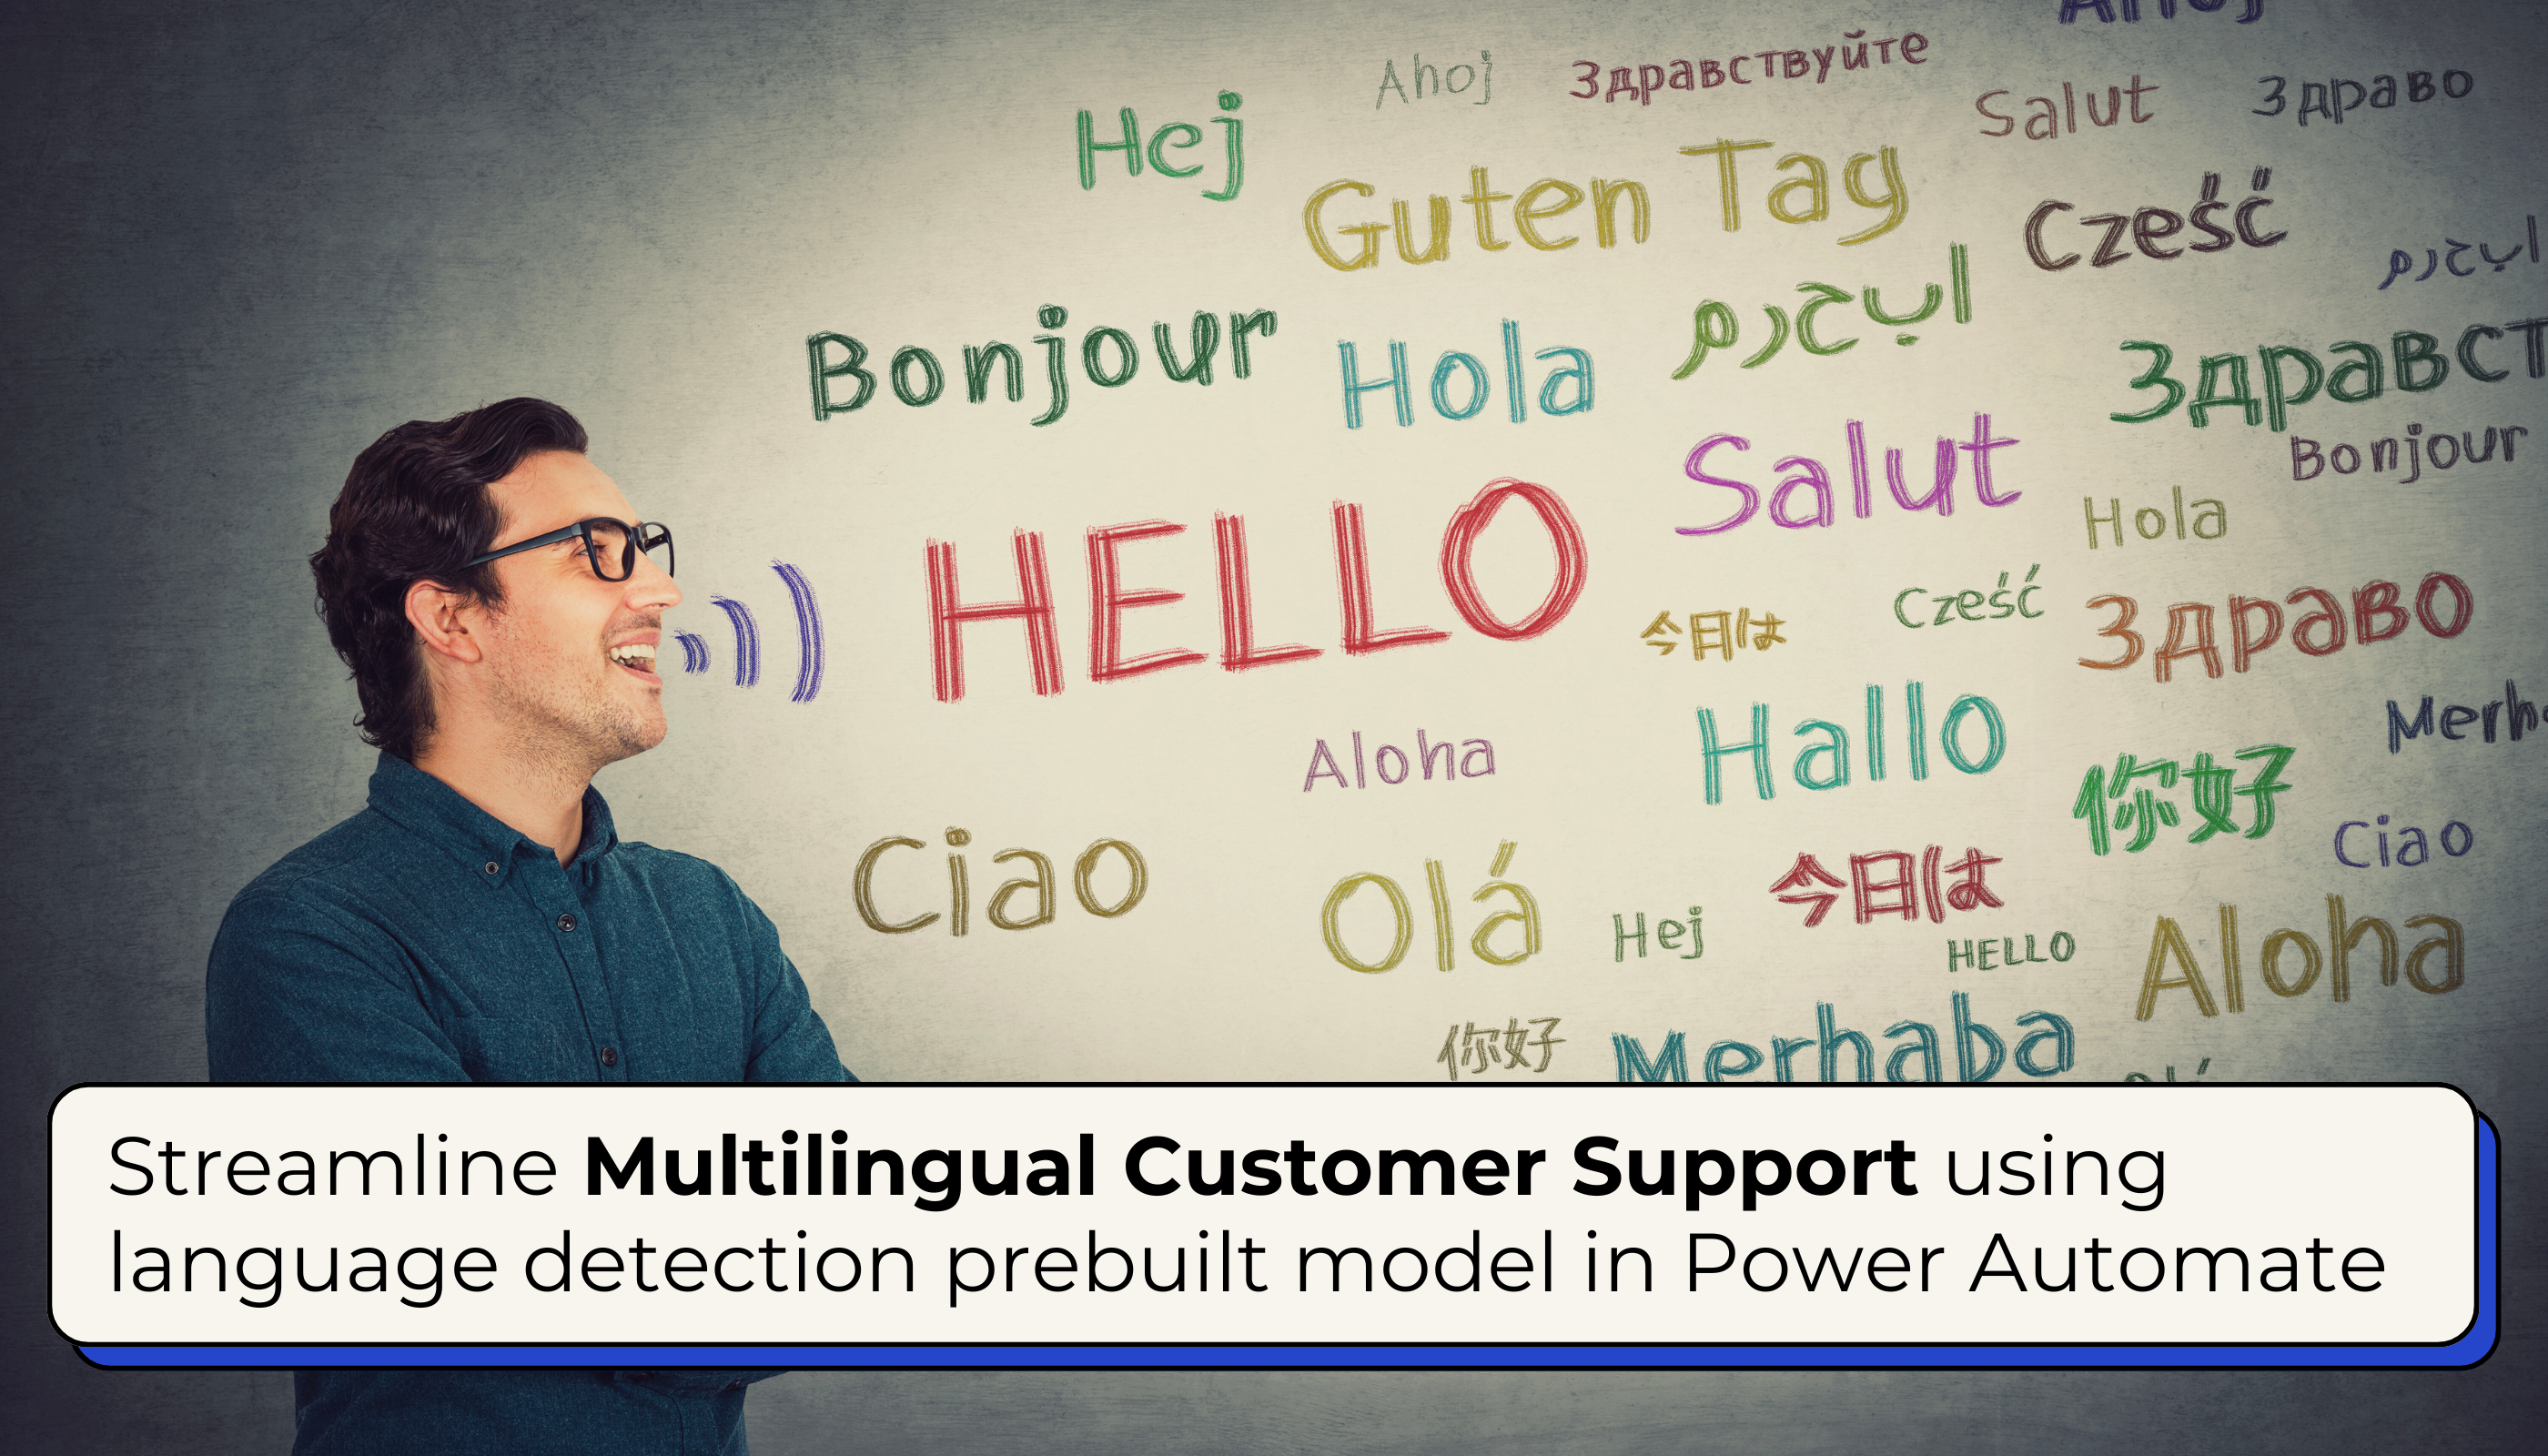 Streamline Multilingual Customer Support using Language Detection Prebuilt Model in Power Automate